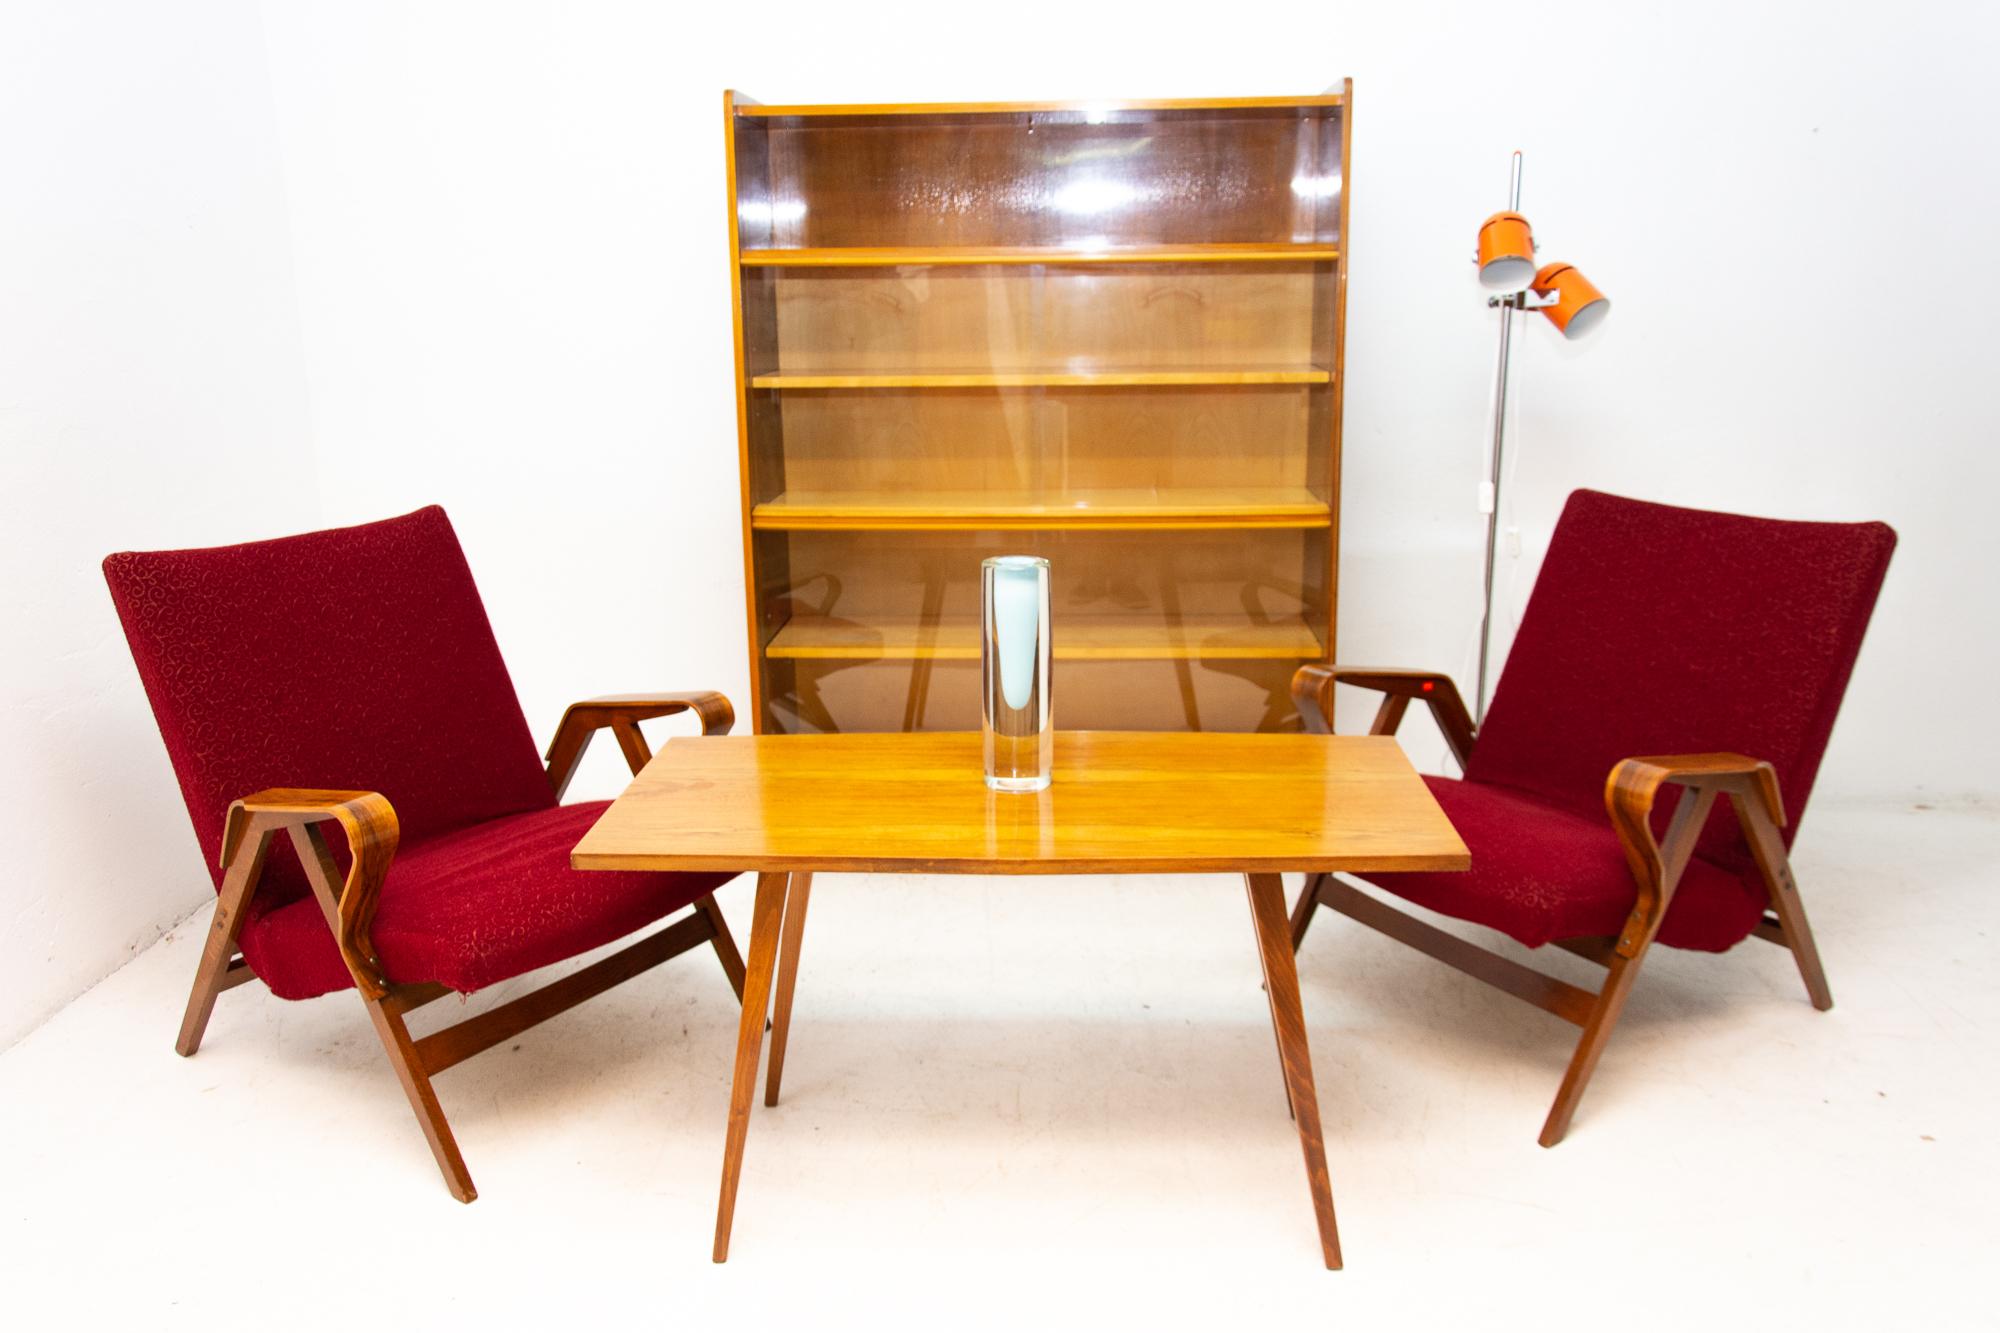 Mid century vintage bookcase from the 1960´s. It was designed by František Jirák and was manufactured by Jitona company in the former Czechoslovakia. Features a simple design, a glazed section with five storage spaces. In Very good condition.